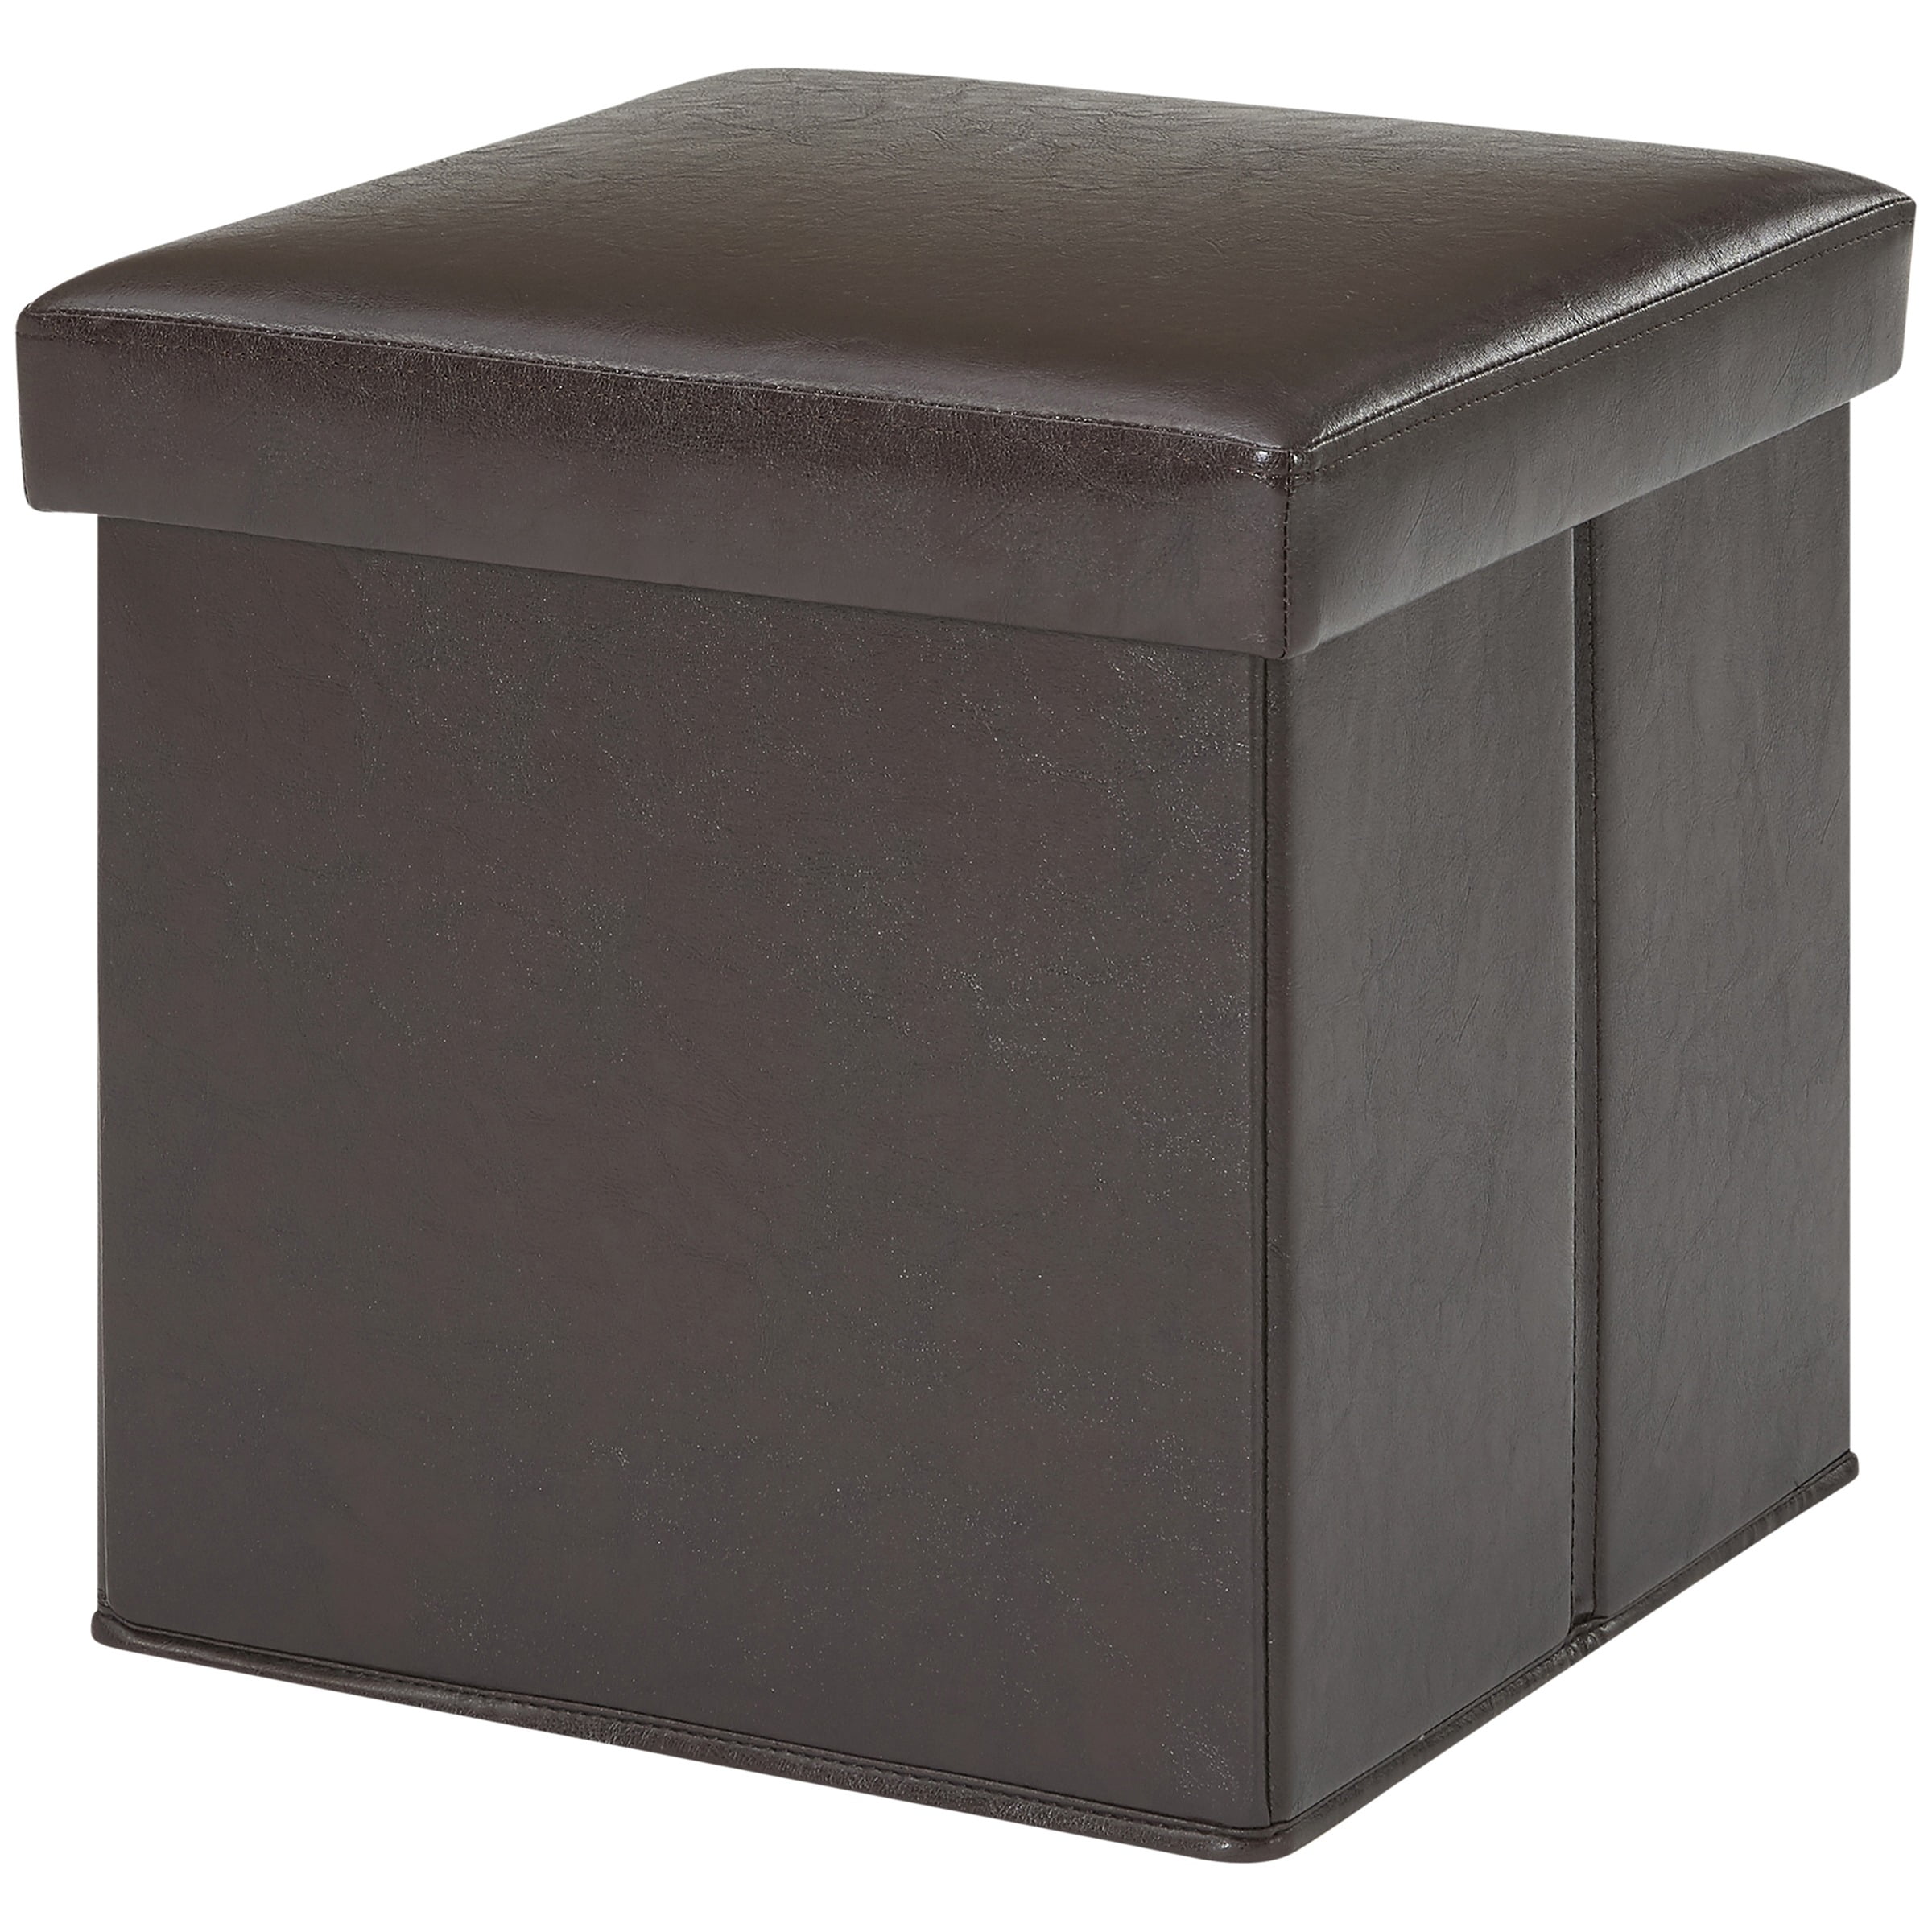 Mainstays Ultra Collapsible Storage, Storage Ottoman Leather Brown